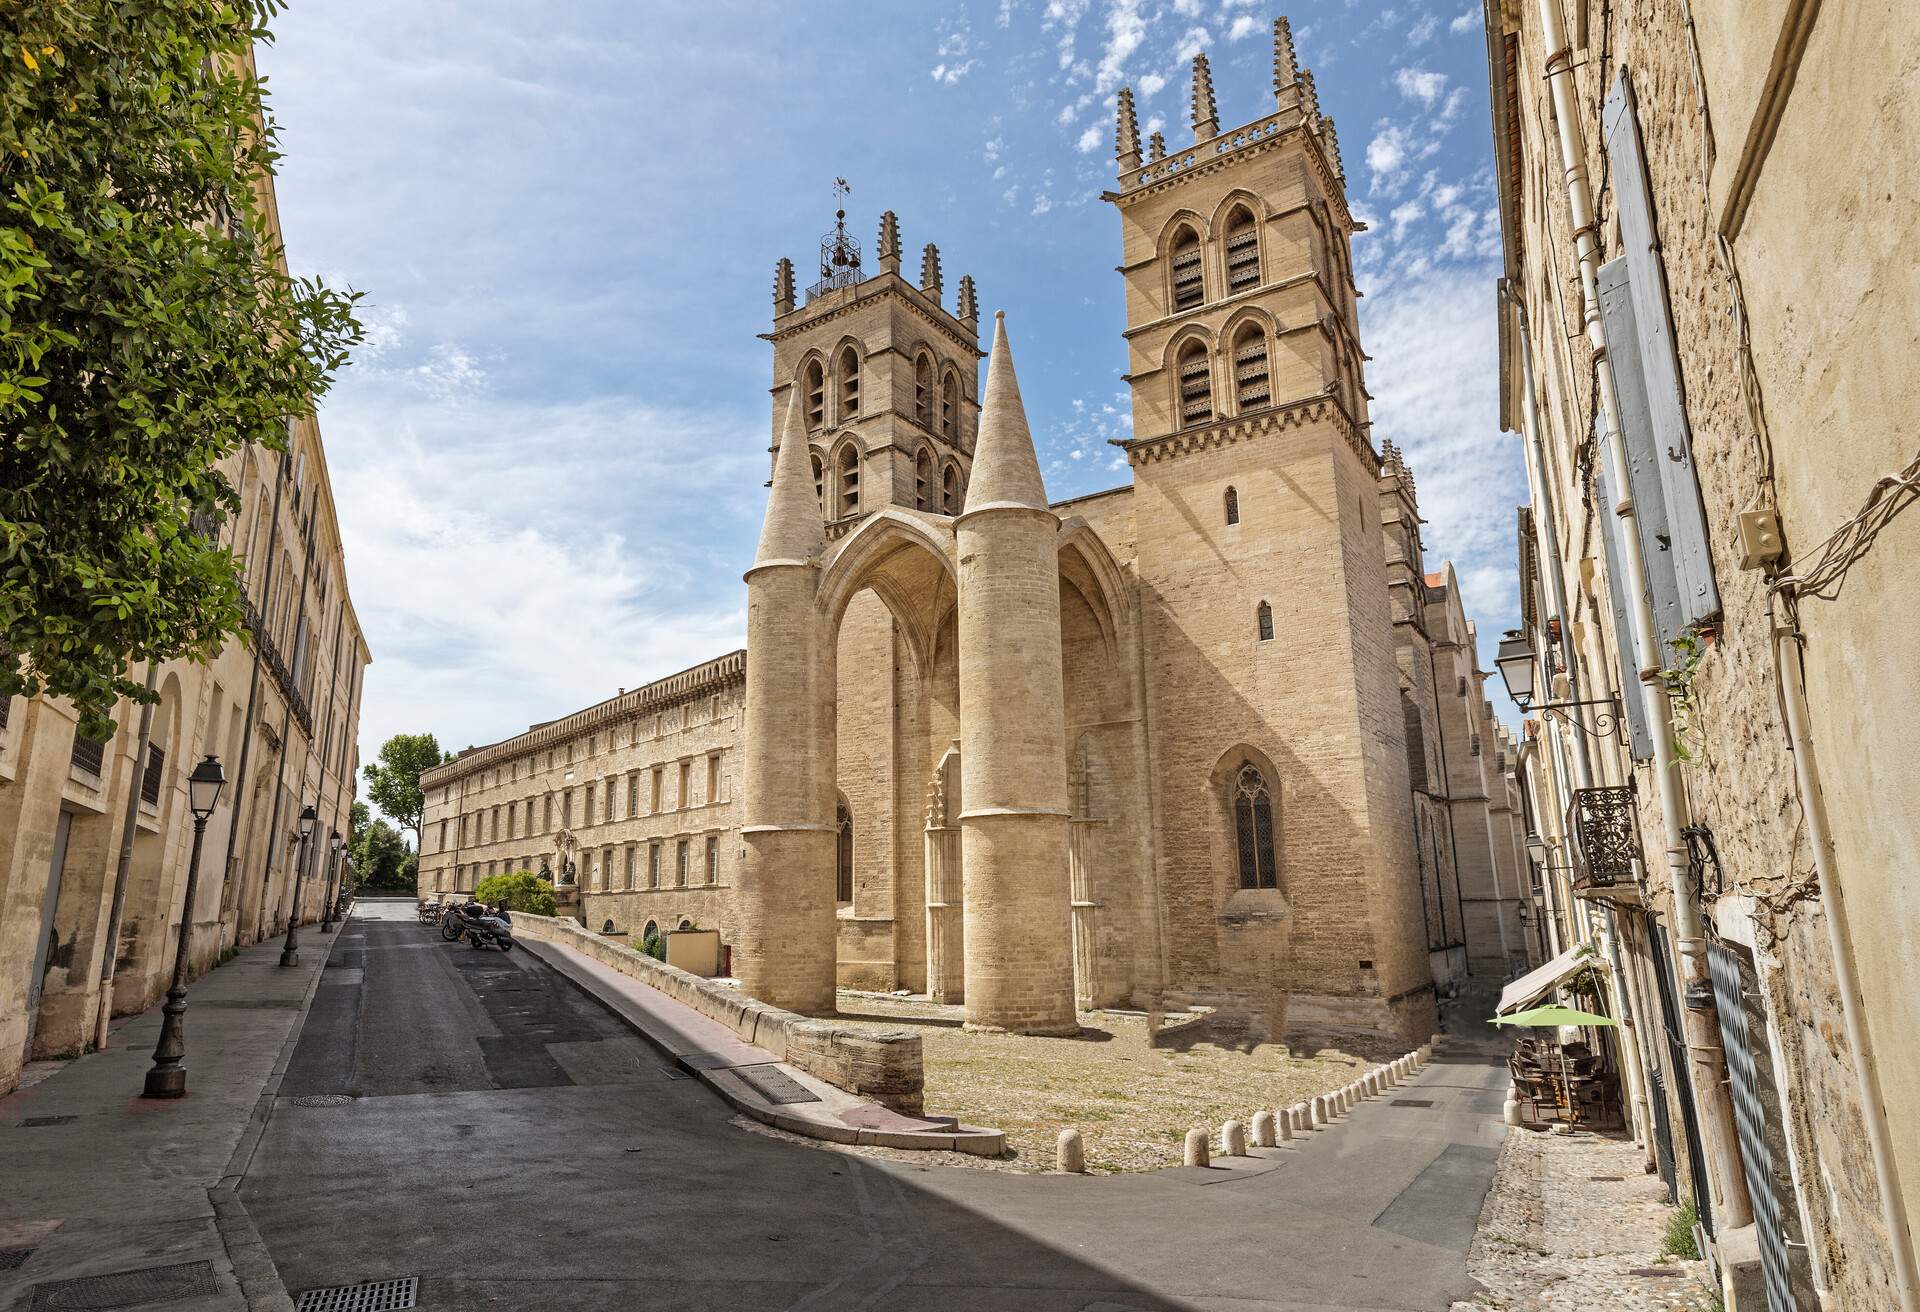 DEST_FRANCE_MONTPELLIER_MONTPELLIER-CATHEDRAL-GettyImages-697068722